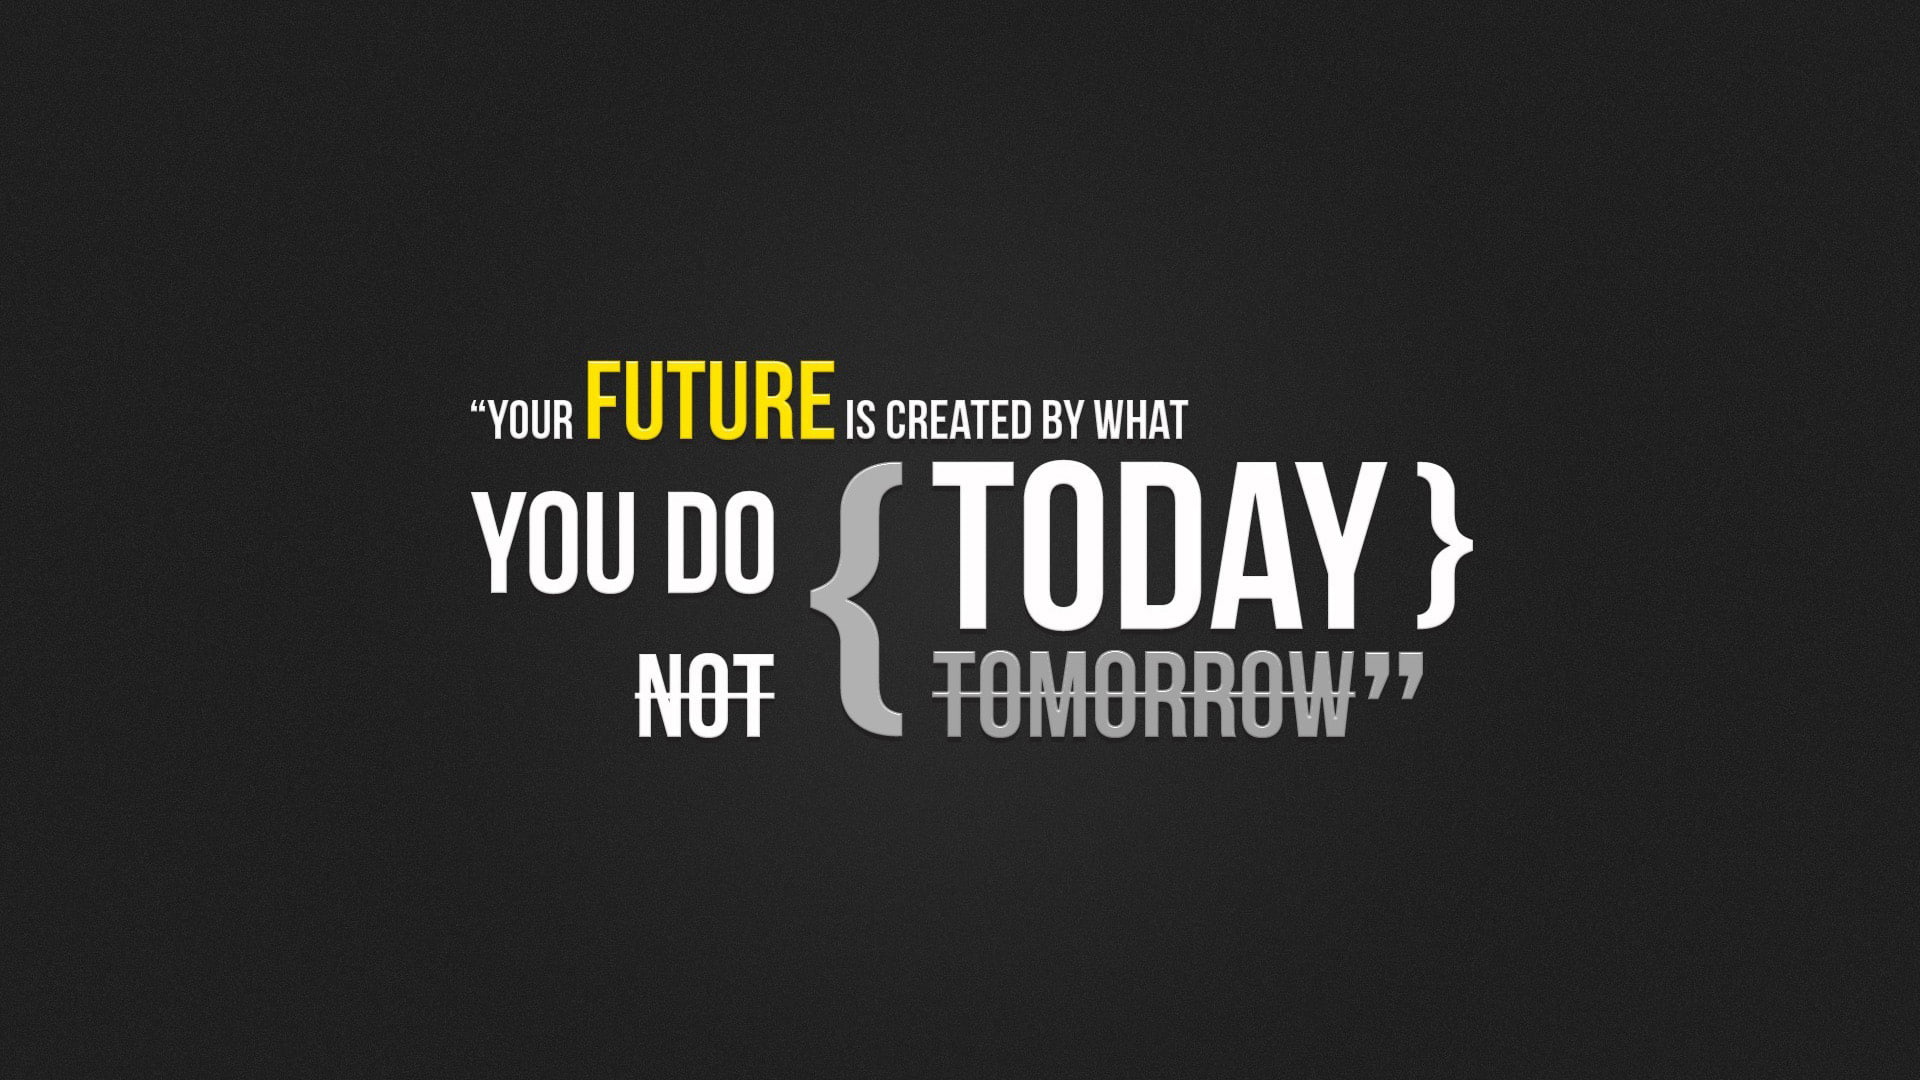 Your Future HD, your future is created by what you do today not tomorrow